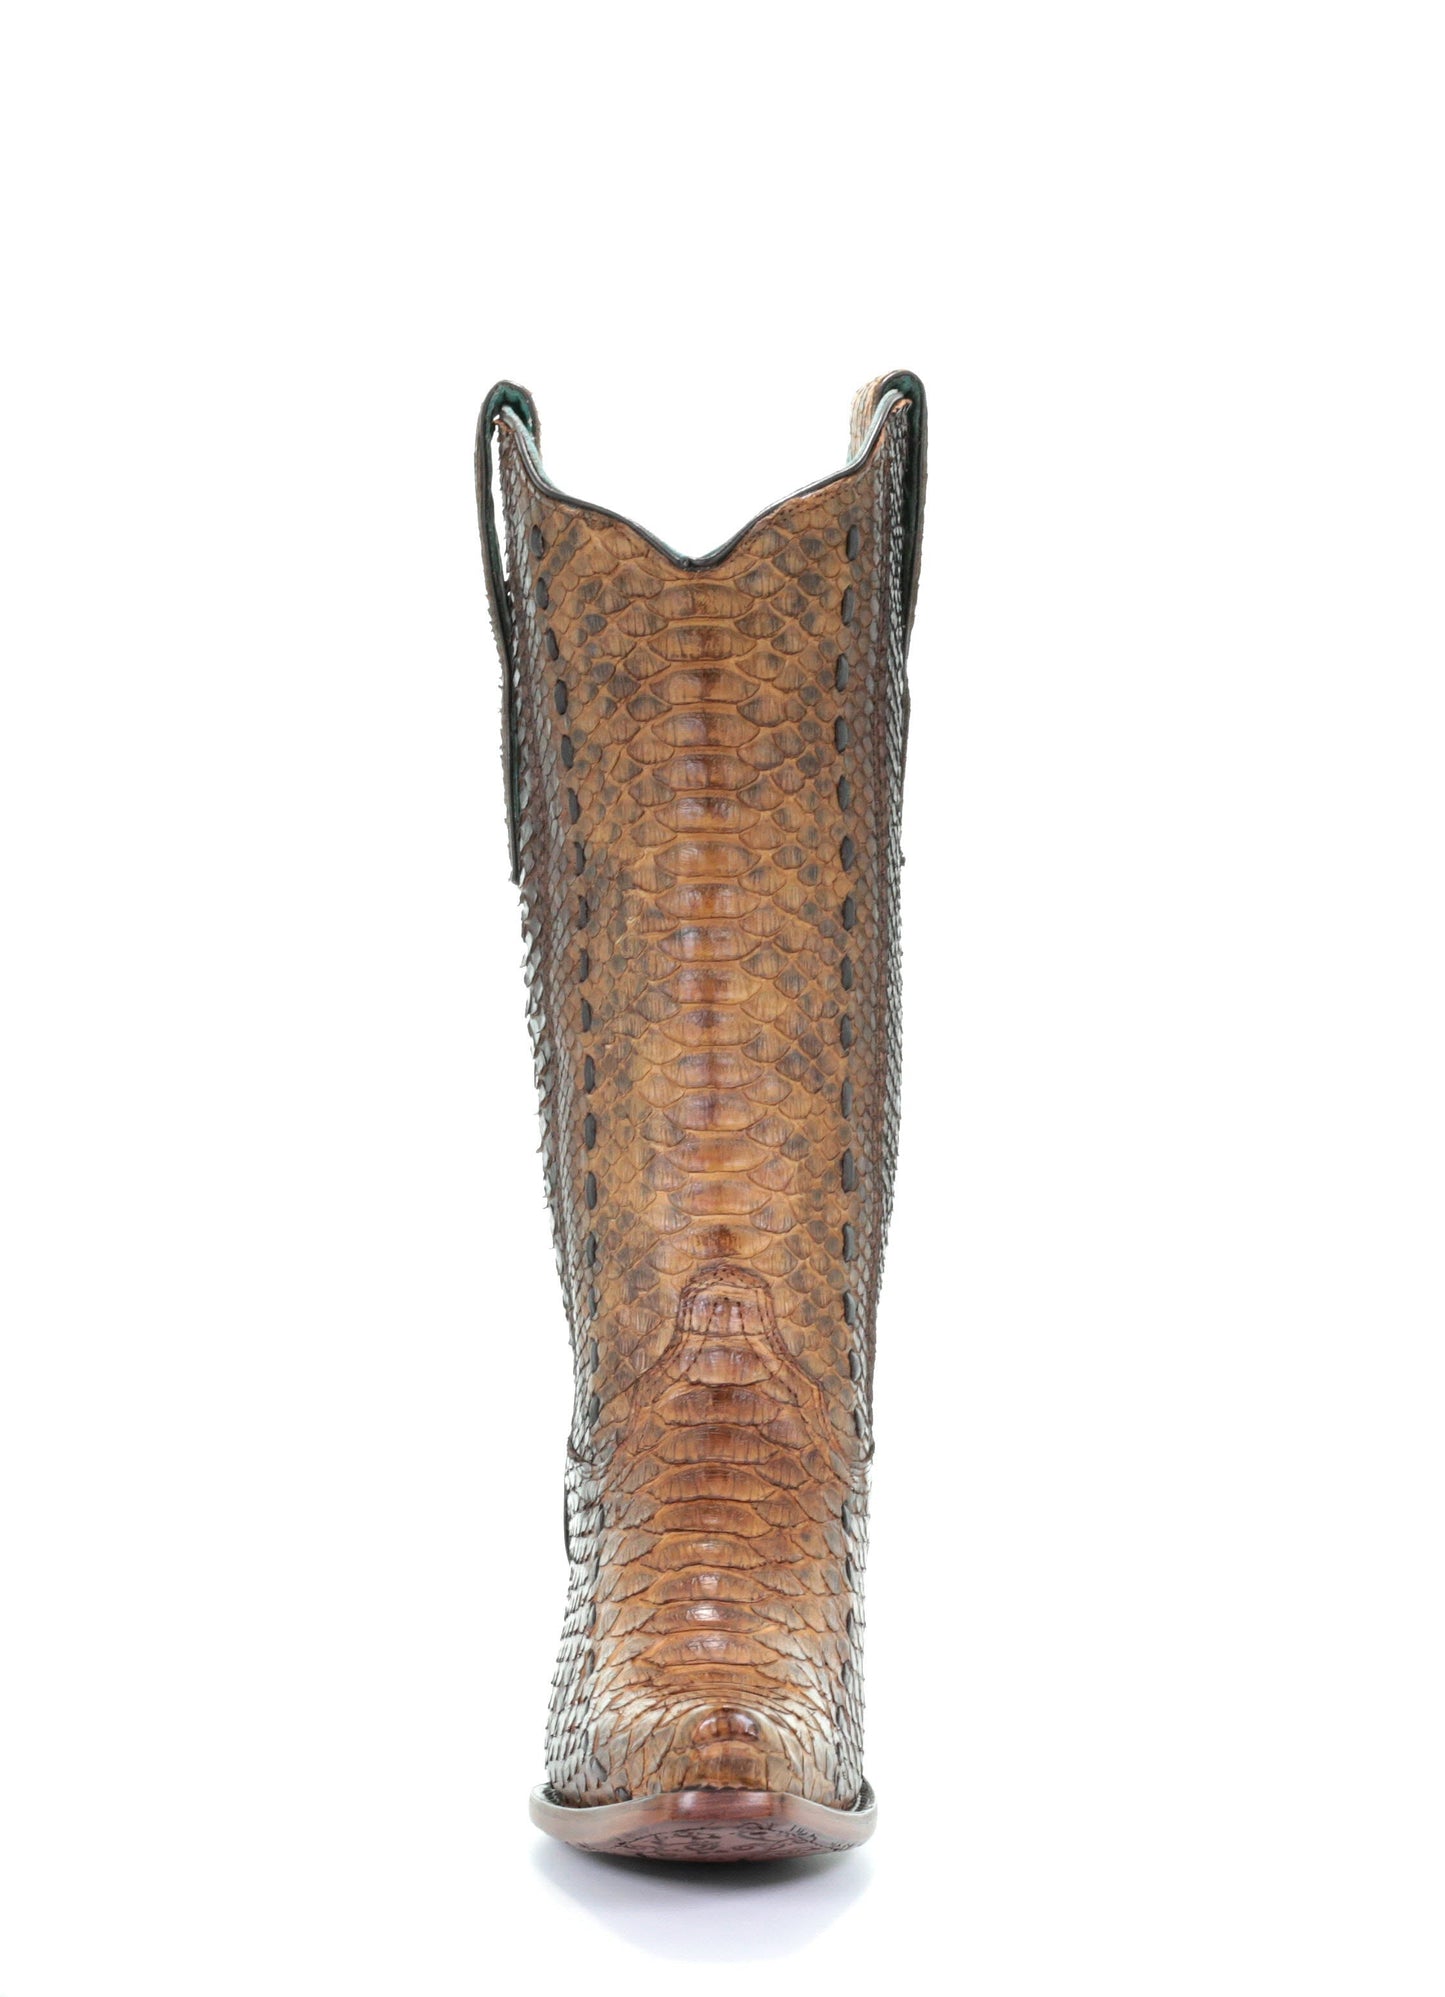 A3659 - Corral brown western cowboy python leather boots for women-Kuet.us